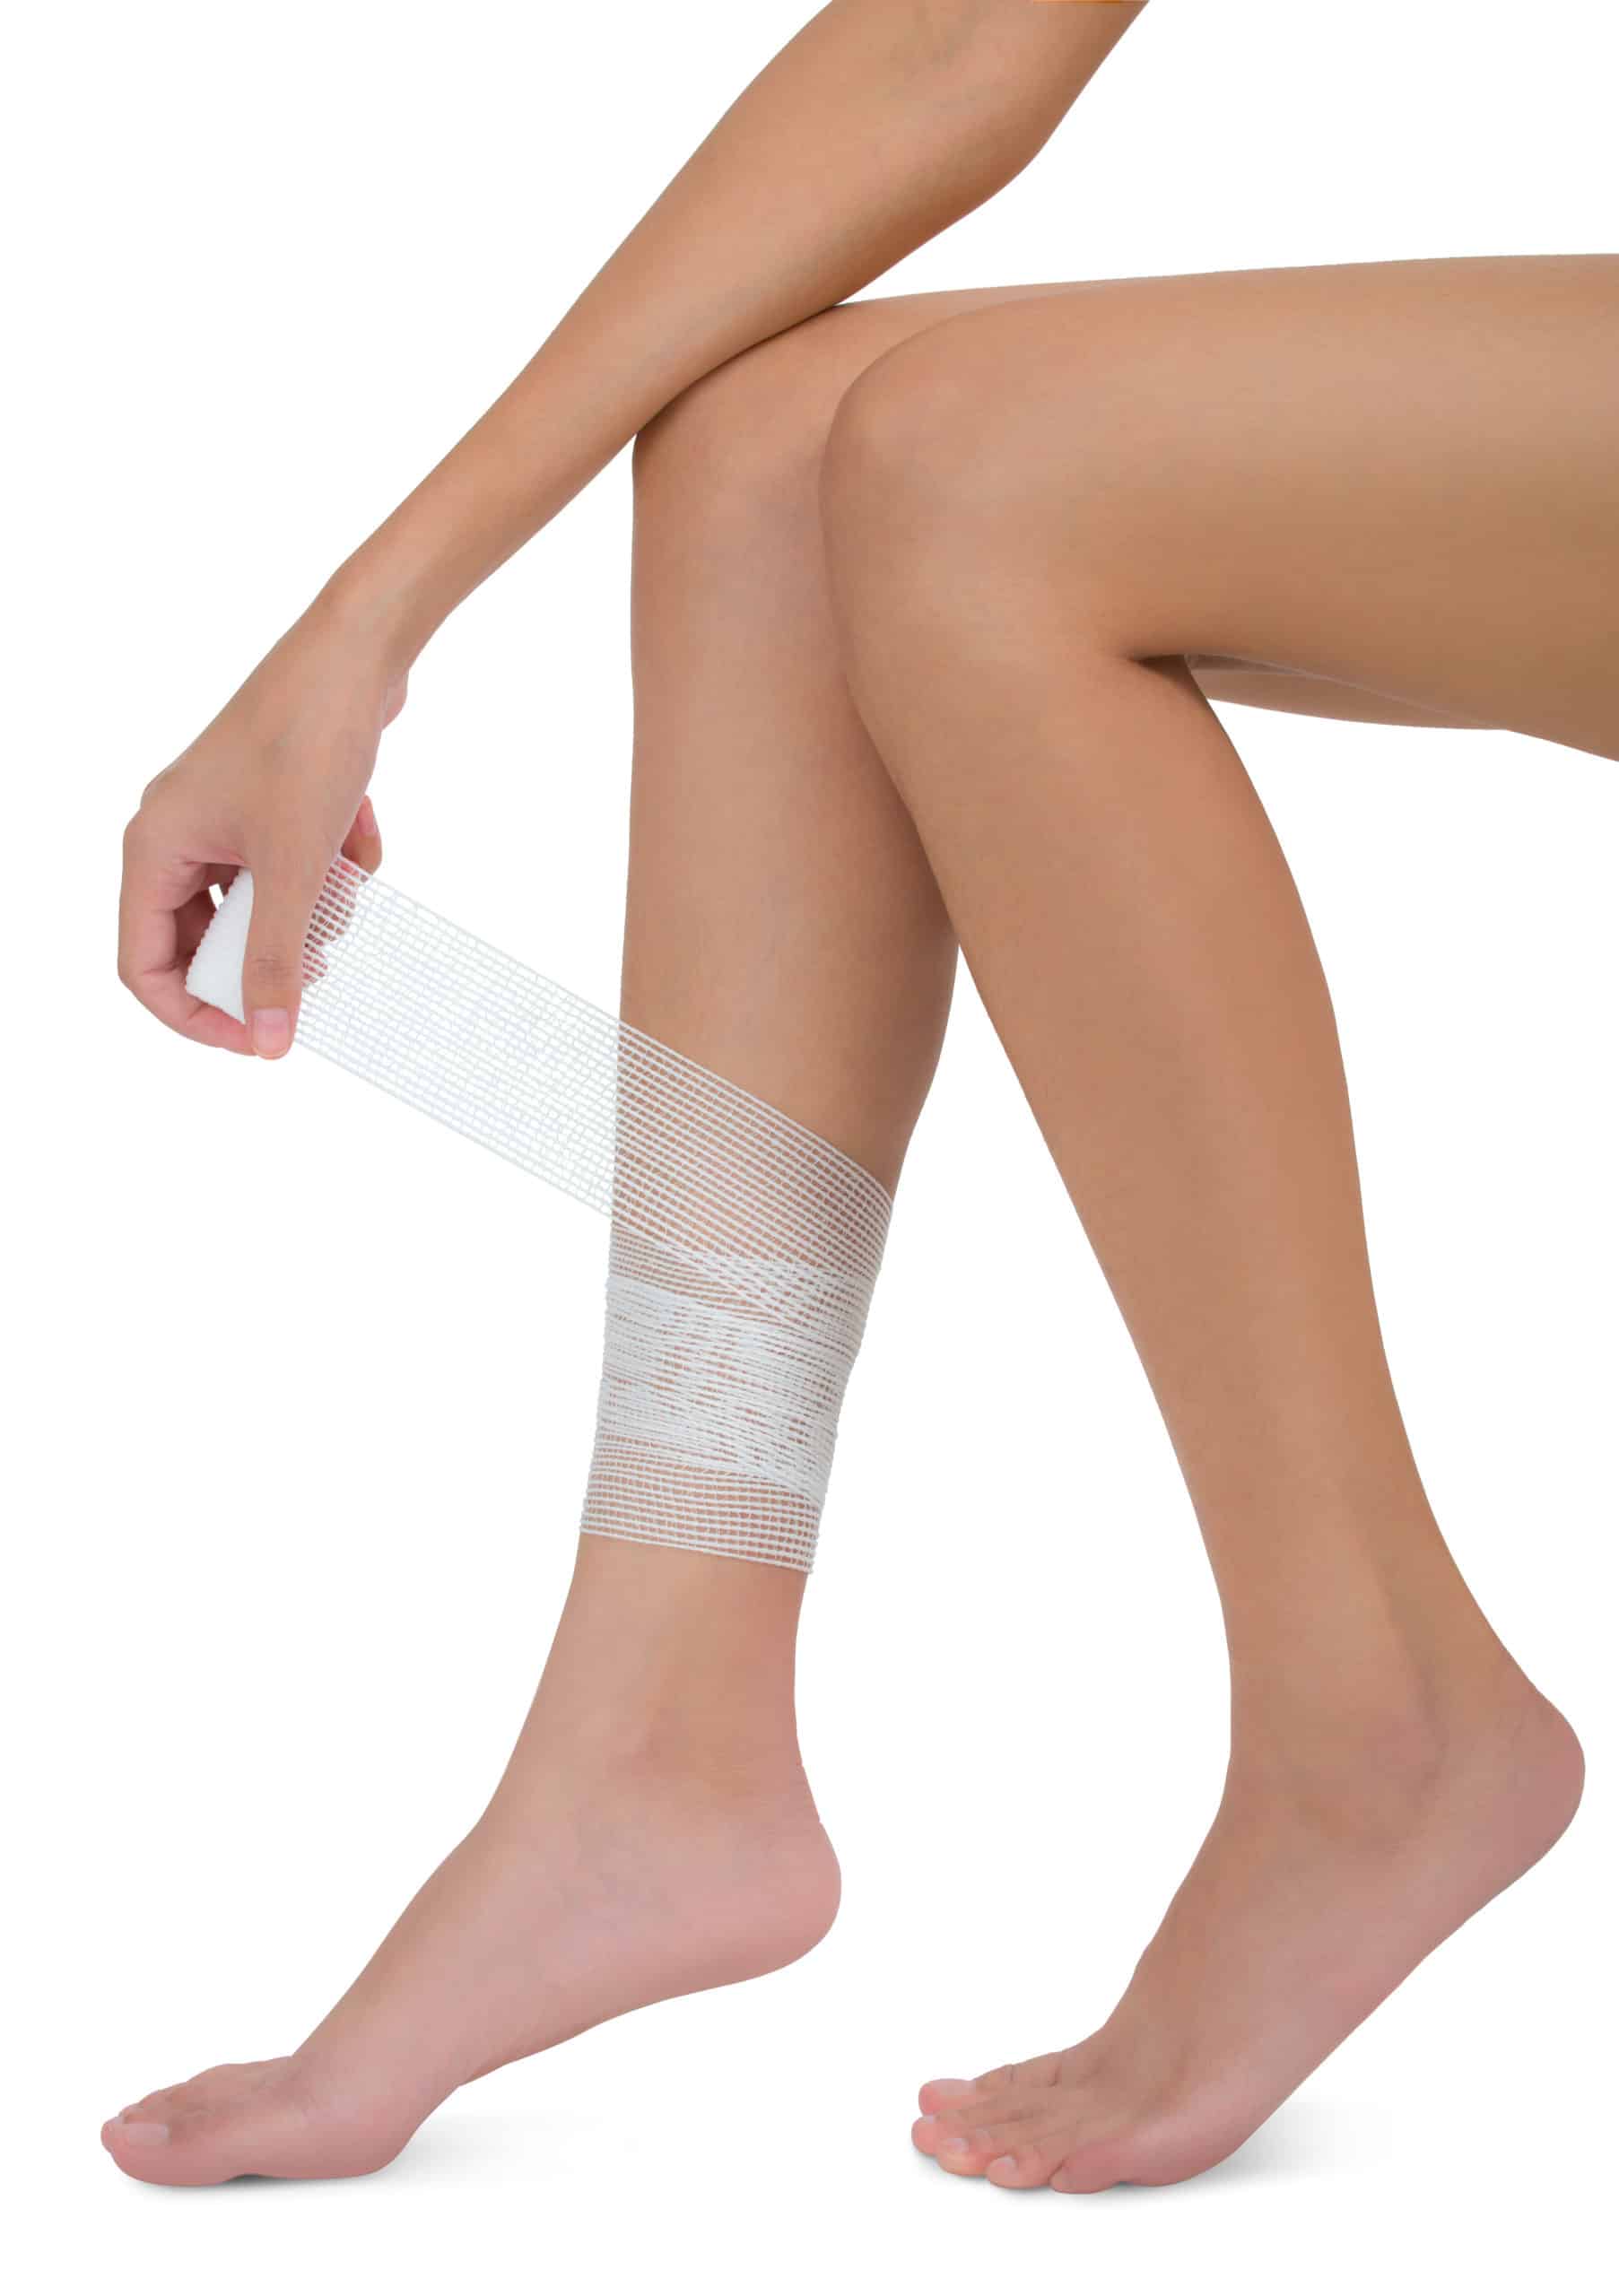 woman bandaging and first aid her beautiful Healthy long leg in pain area, Isolated on white background.